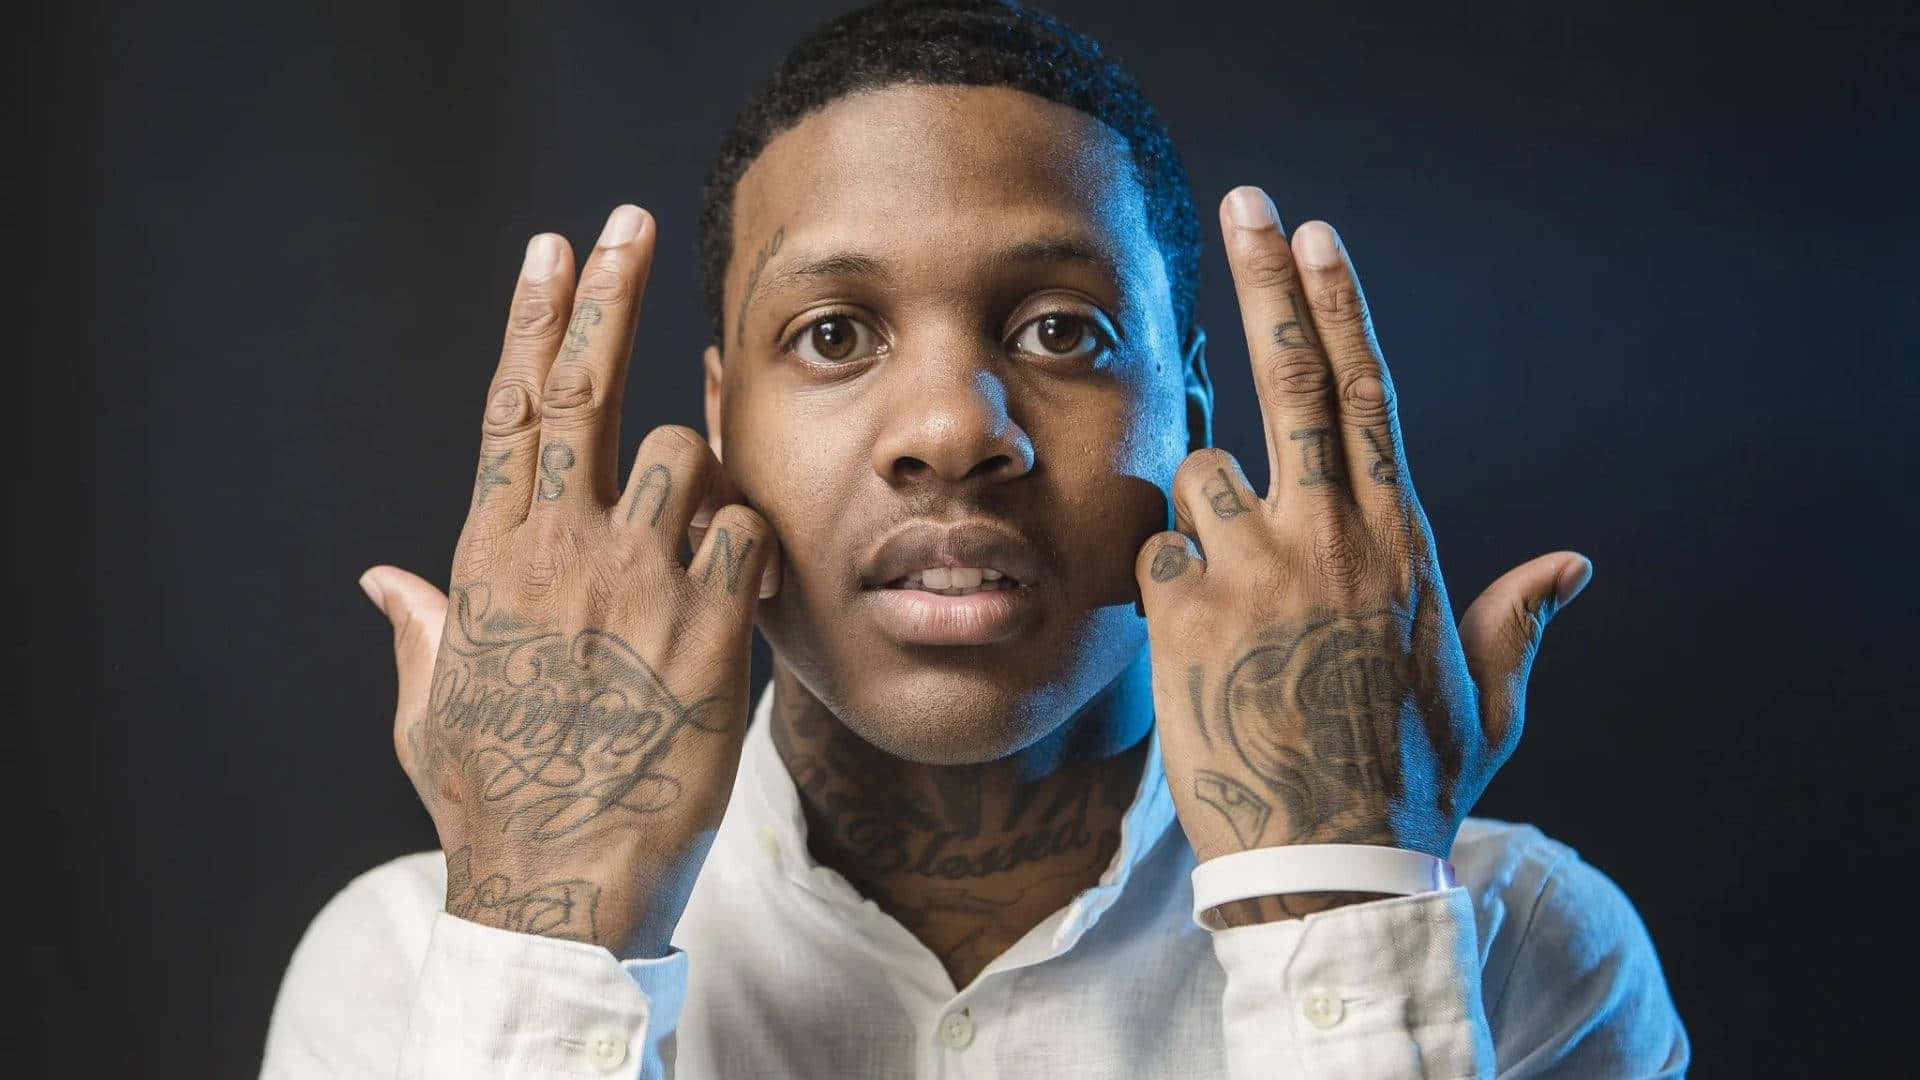 Download Lil Durk posing in a stylish outfit